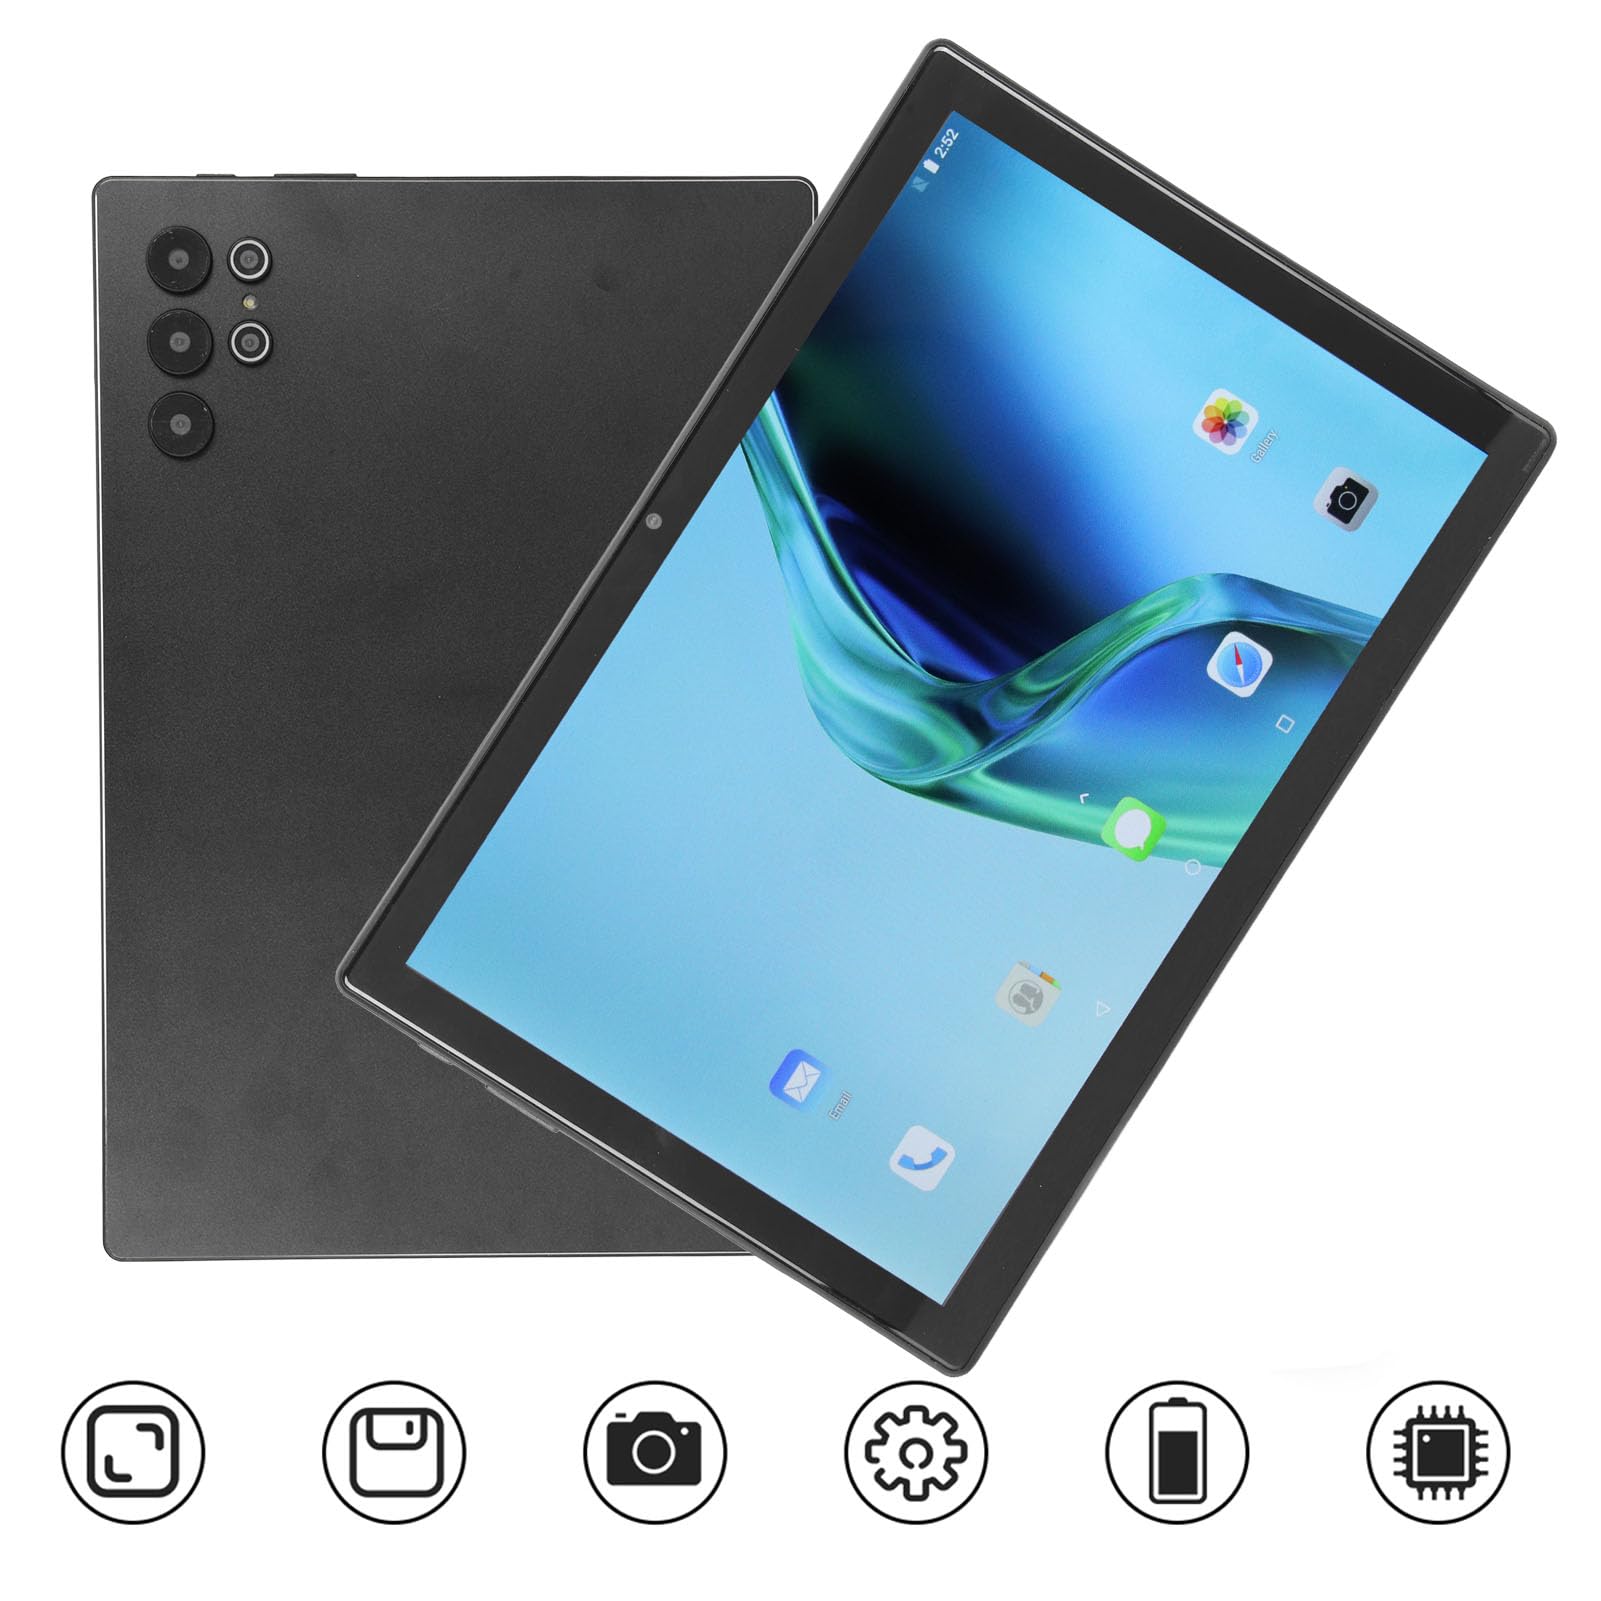 FOLOSAFENAR 10.1in HD Tablet, Dual SIM Dual Standby Octa Core Tablet Aluminum Alloy 4G LTE to Work (Black)